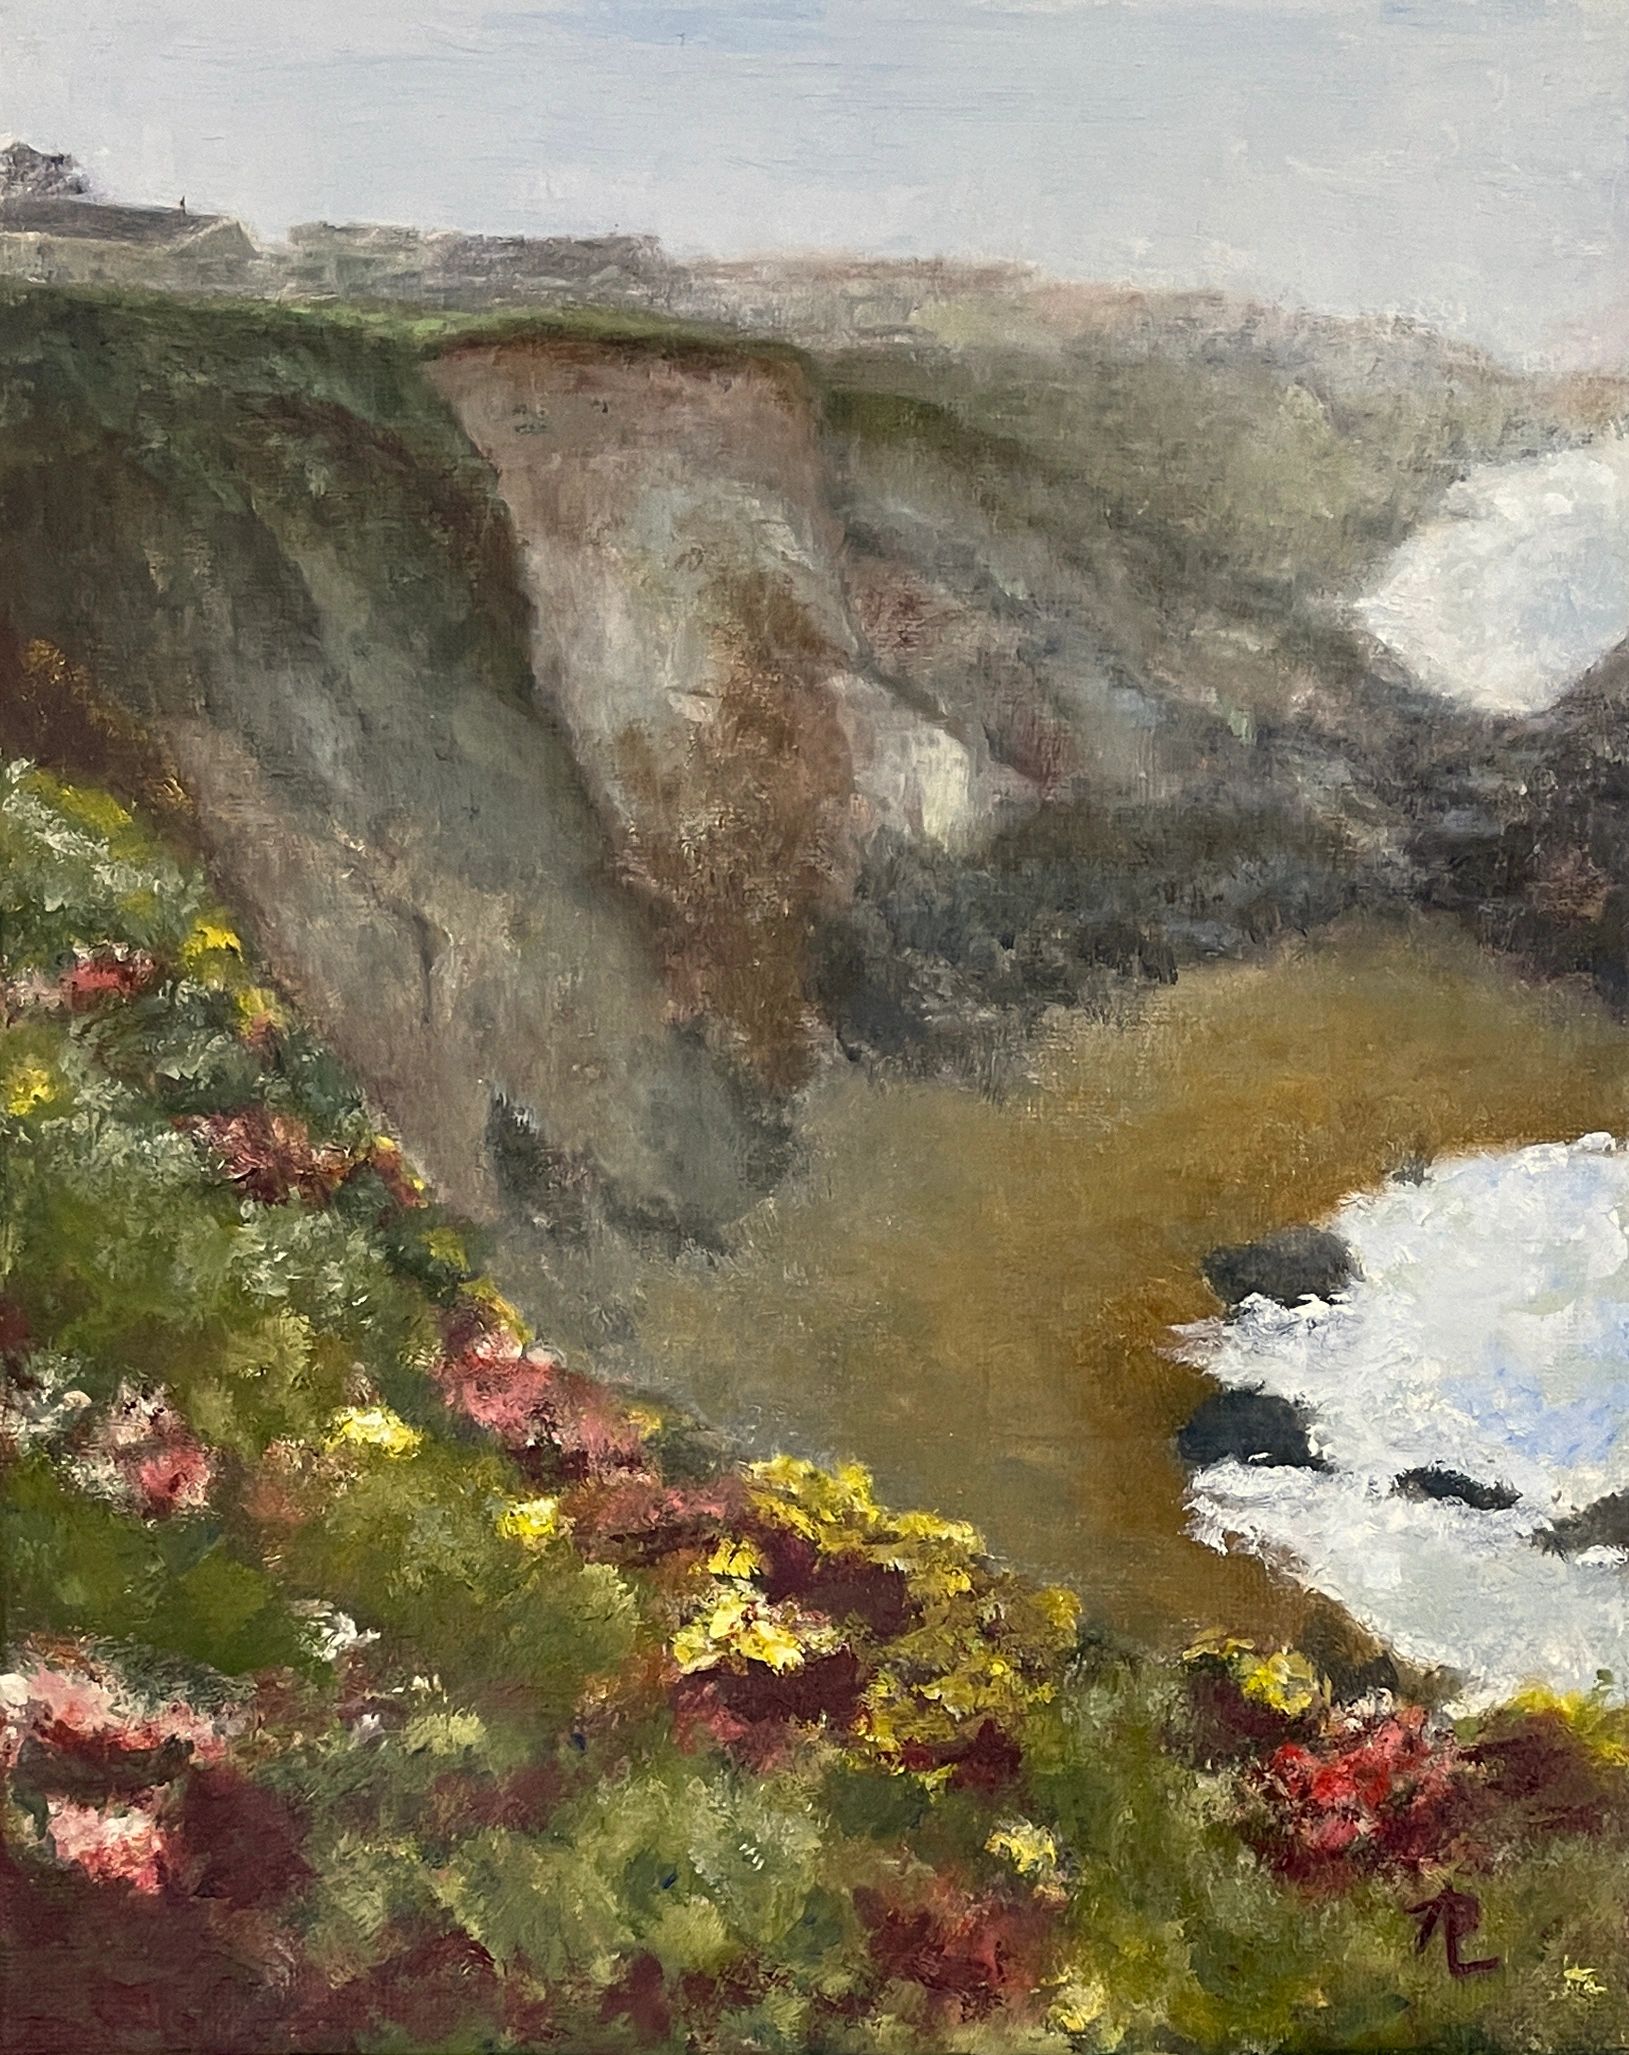 An oil painting of a Bodega Bay beach with flower-covered cliffs of homes set in fog.